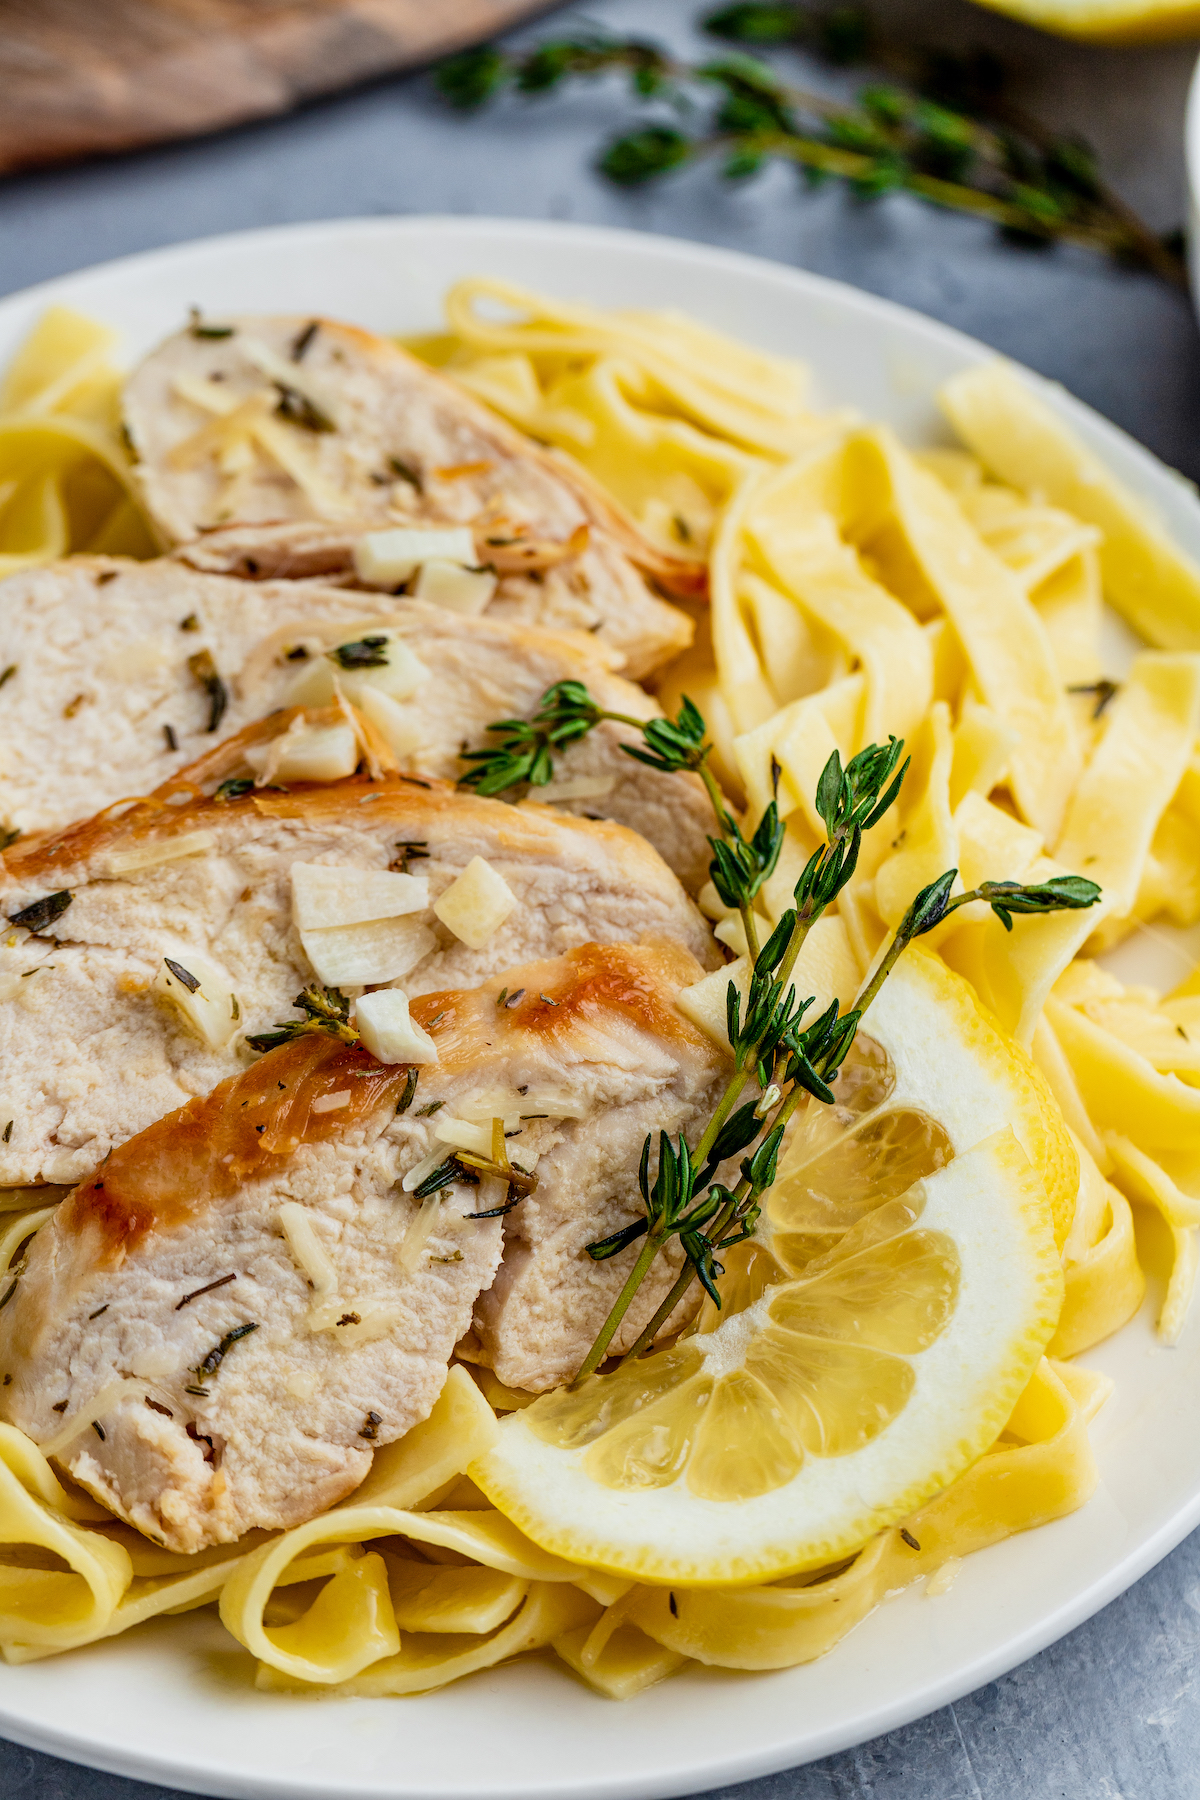 Lemon thyme chicken and pasta served on a plate.